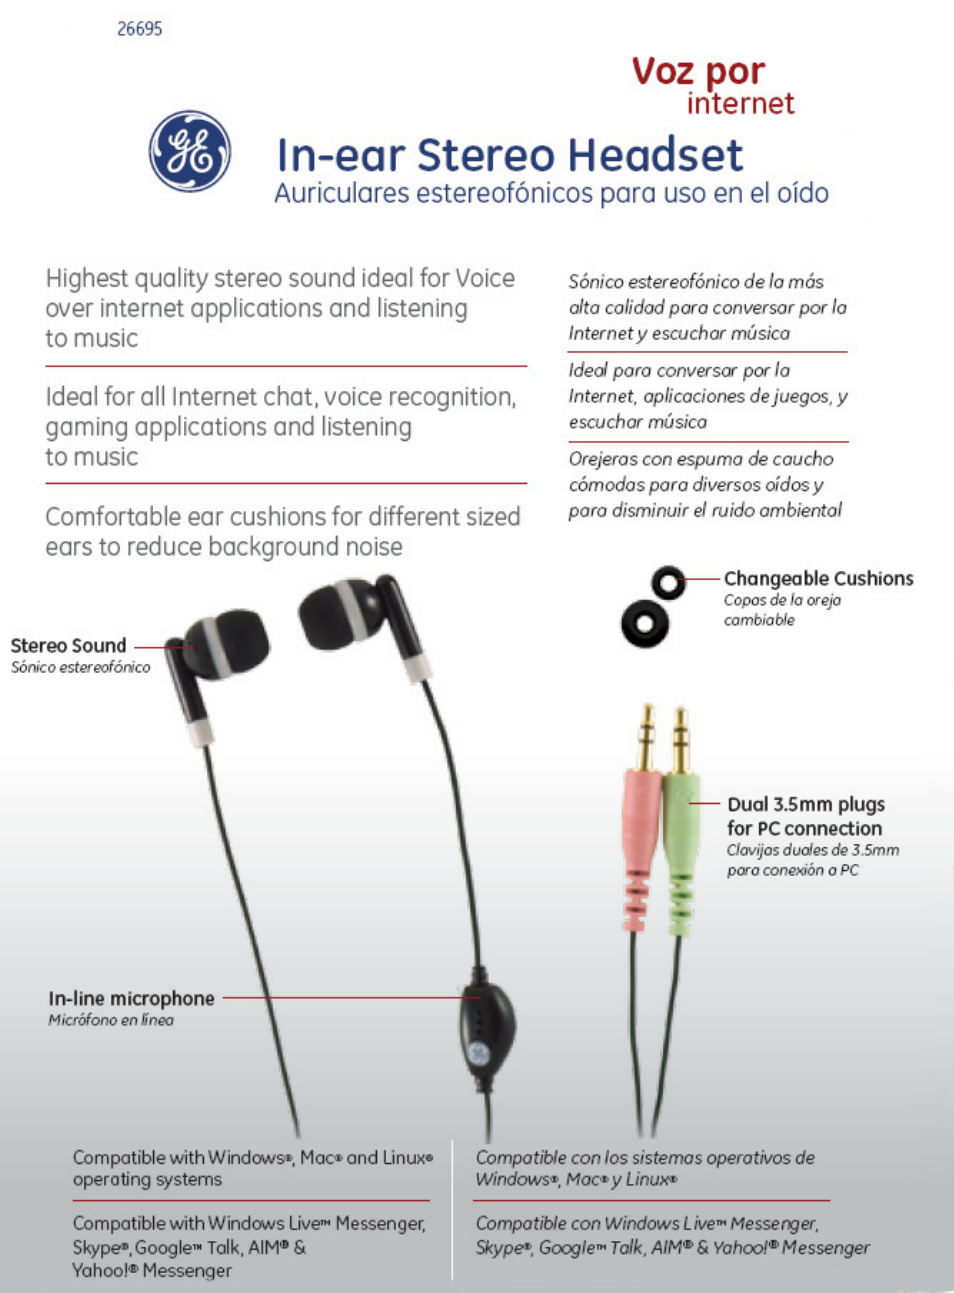 26695 GE VoIP In-Ear Stereo Headset